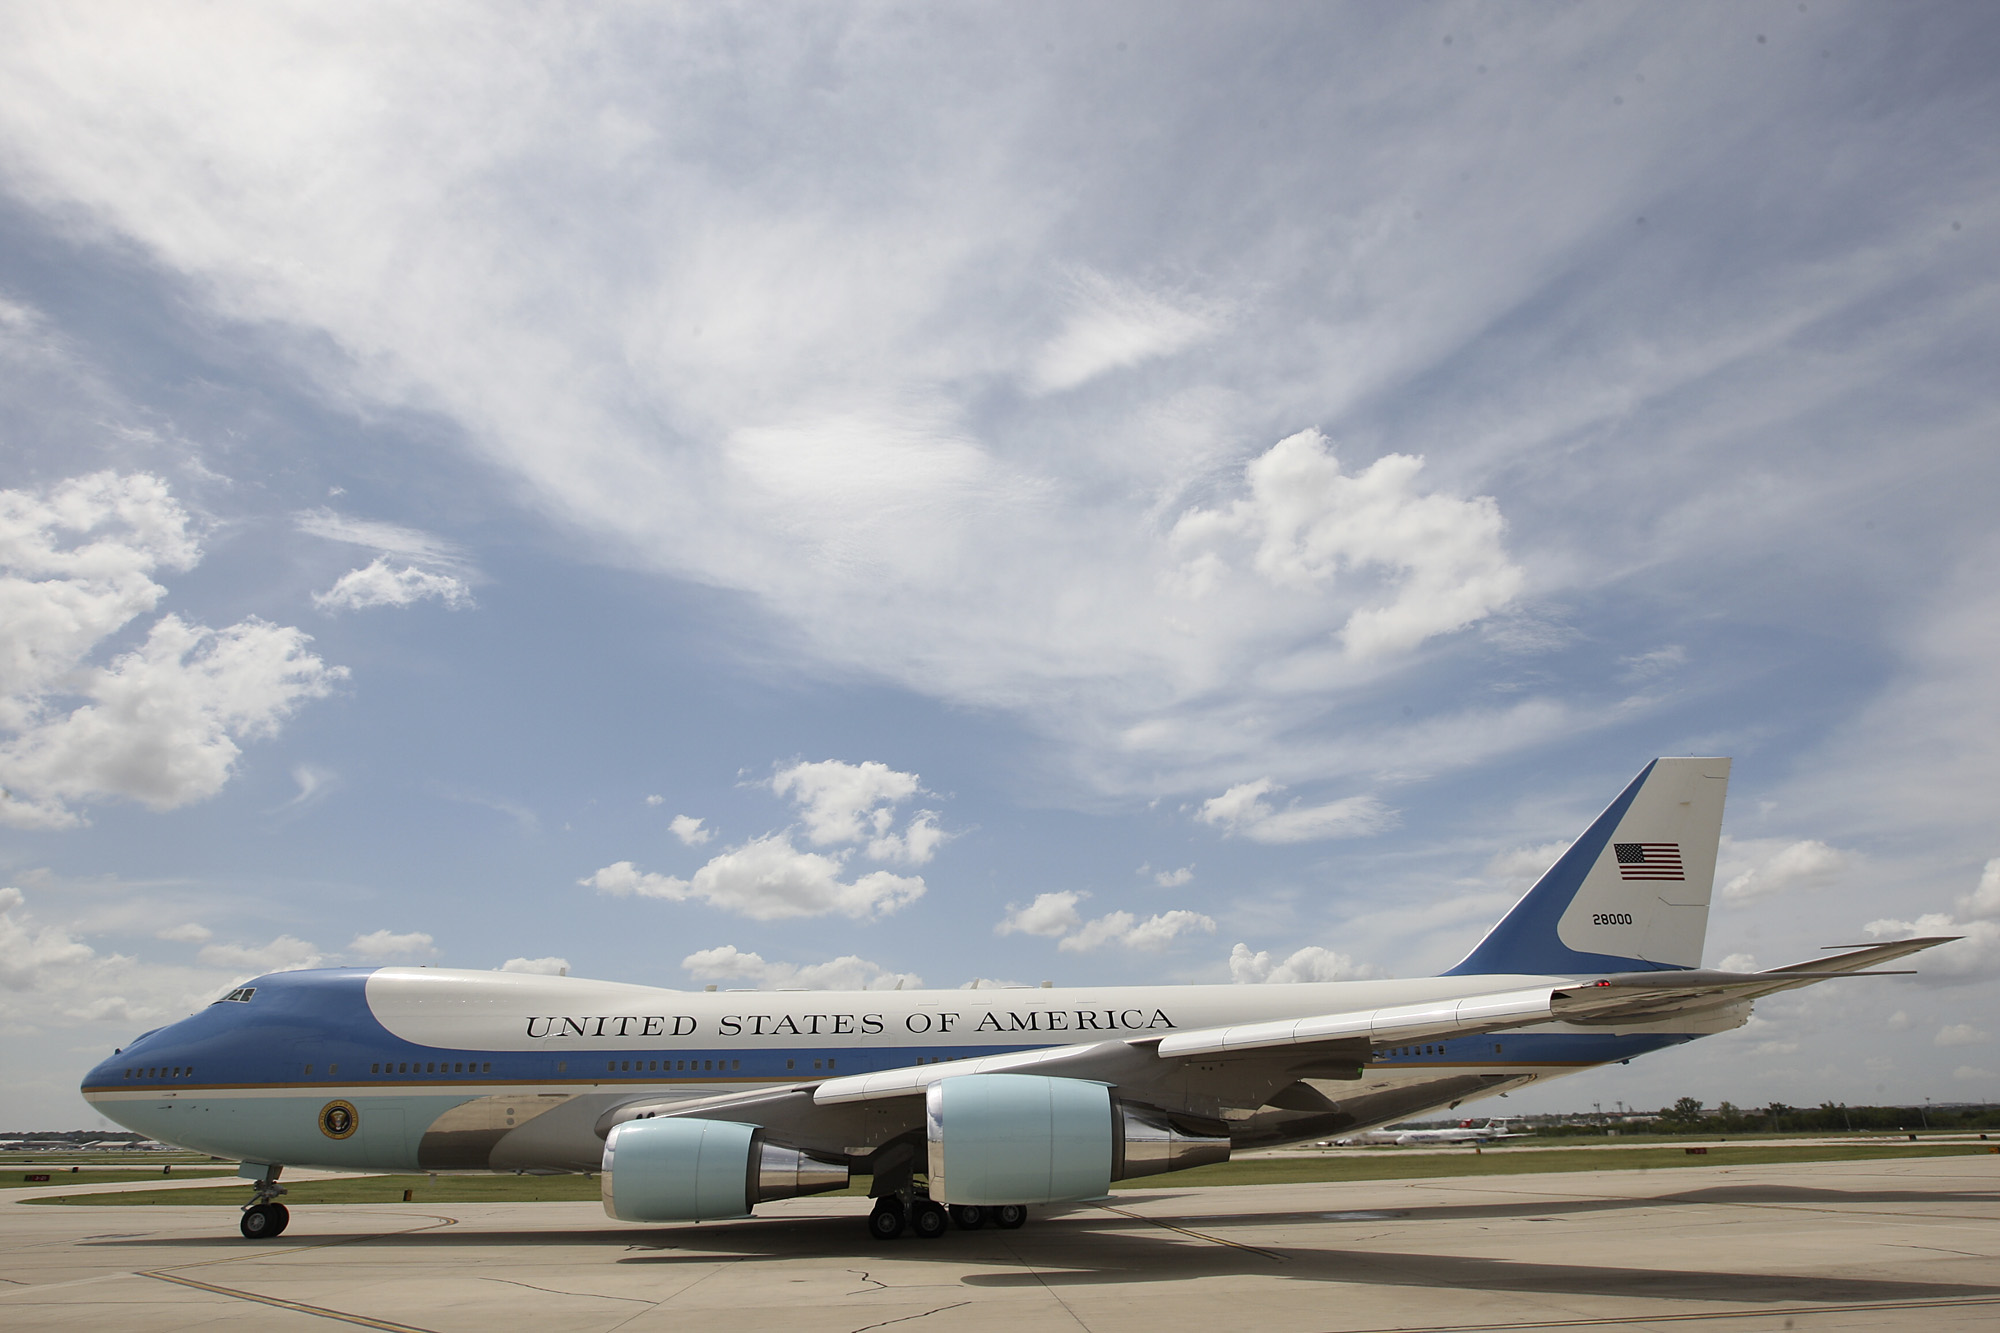 Tequila bottles found on new Air Force One in development in San Antonio,  report says